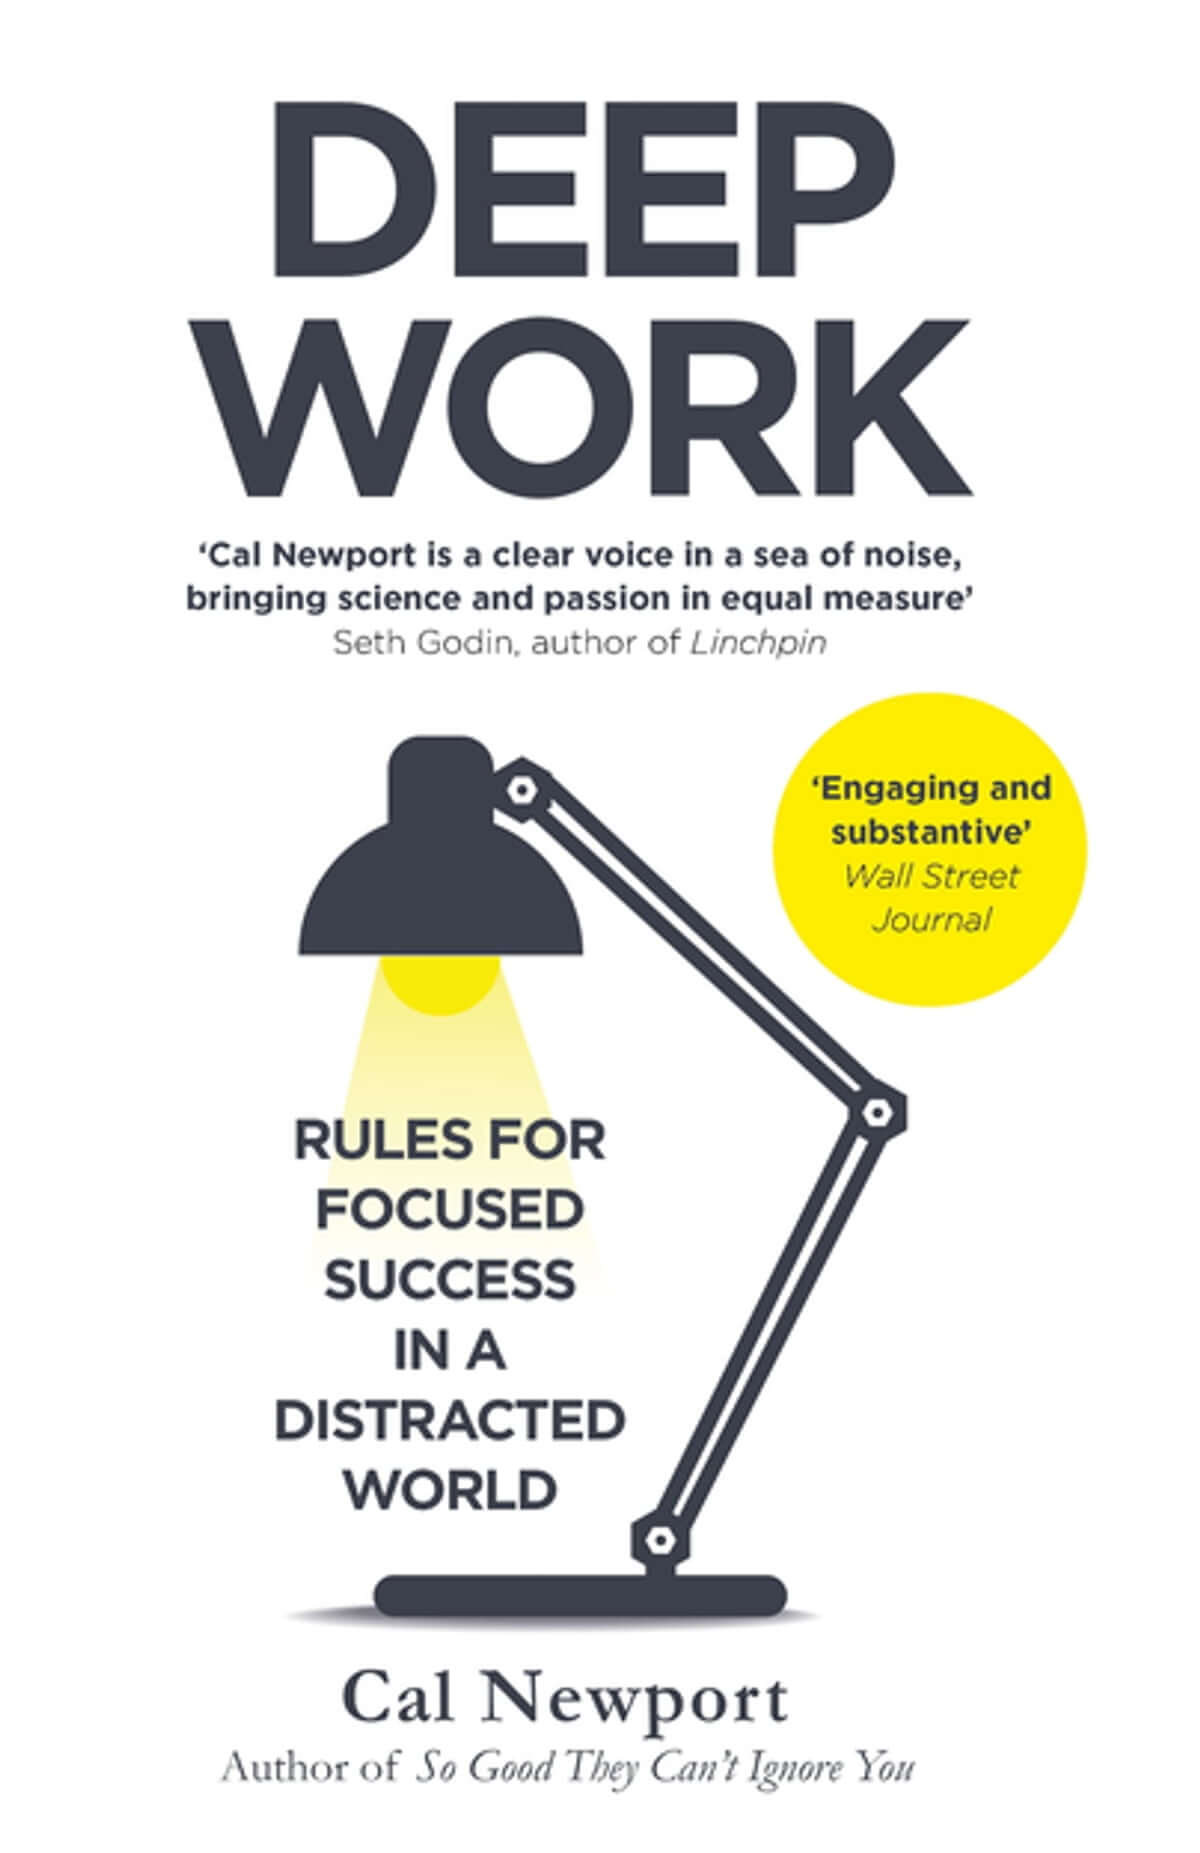 Deep Work: Rules for Focused Success in a Distracted World by Cal Newport